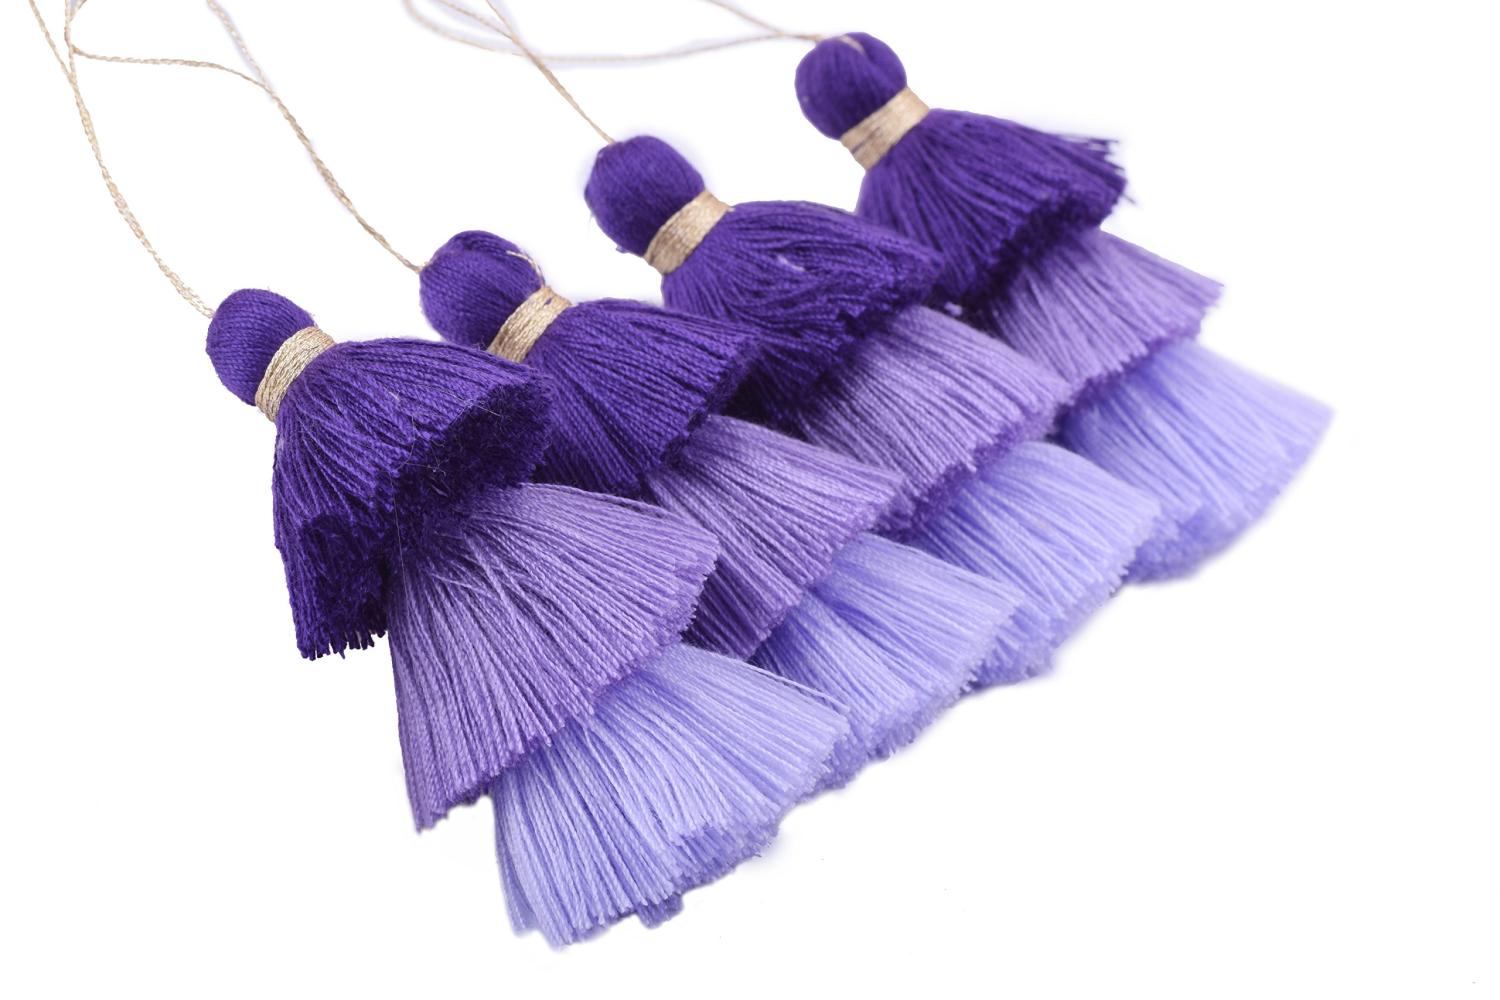  KONMAY 4pcs Tri-Layered Tassels with Hanging Loop for Jewelry  Making, Clothing